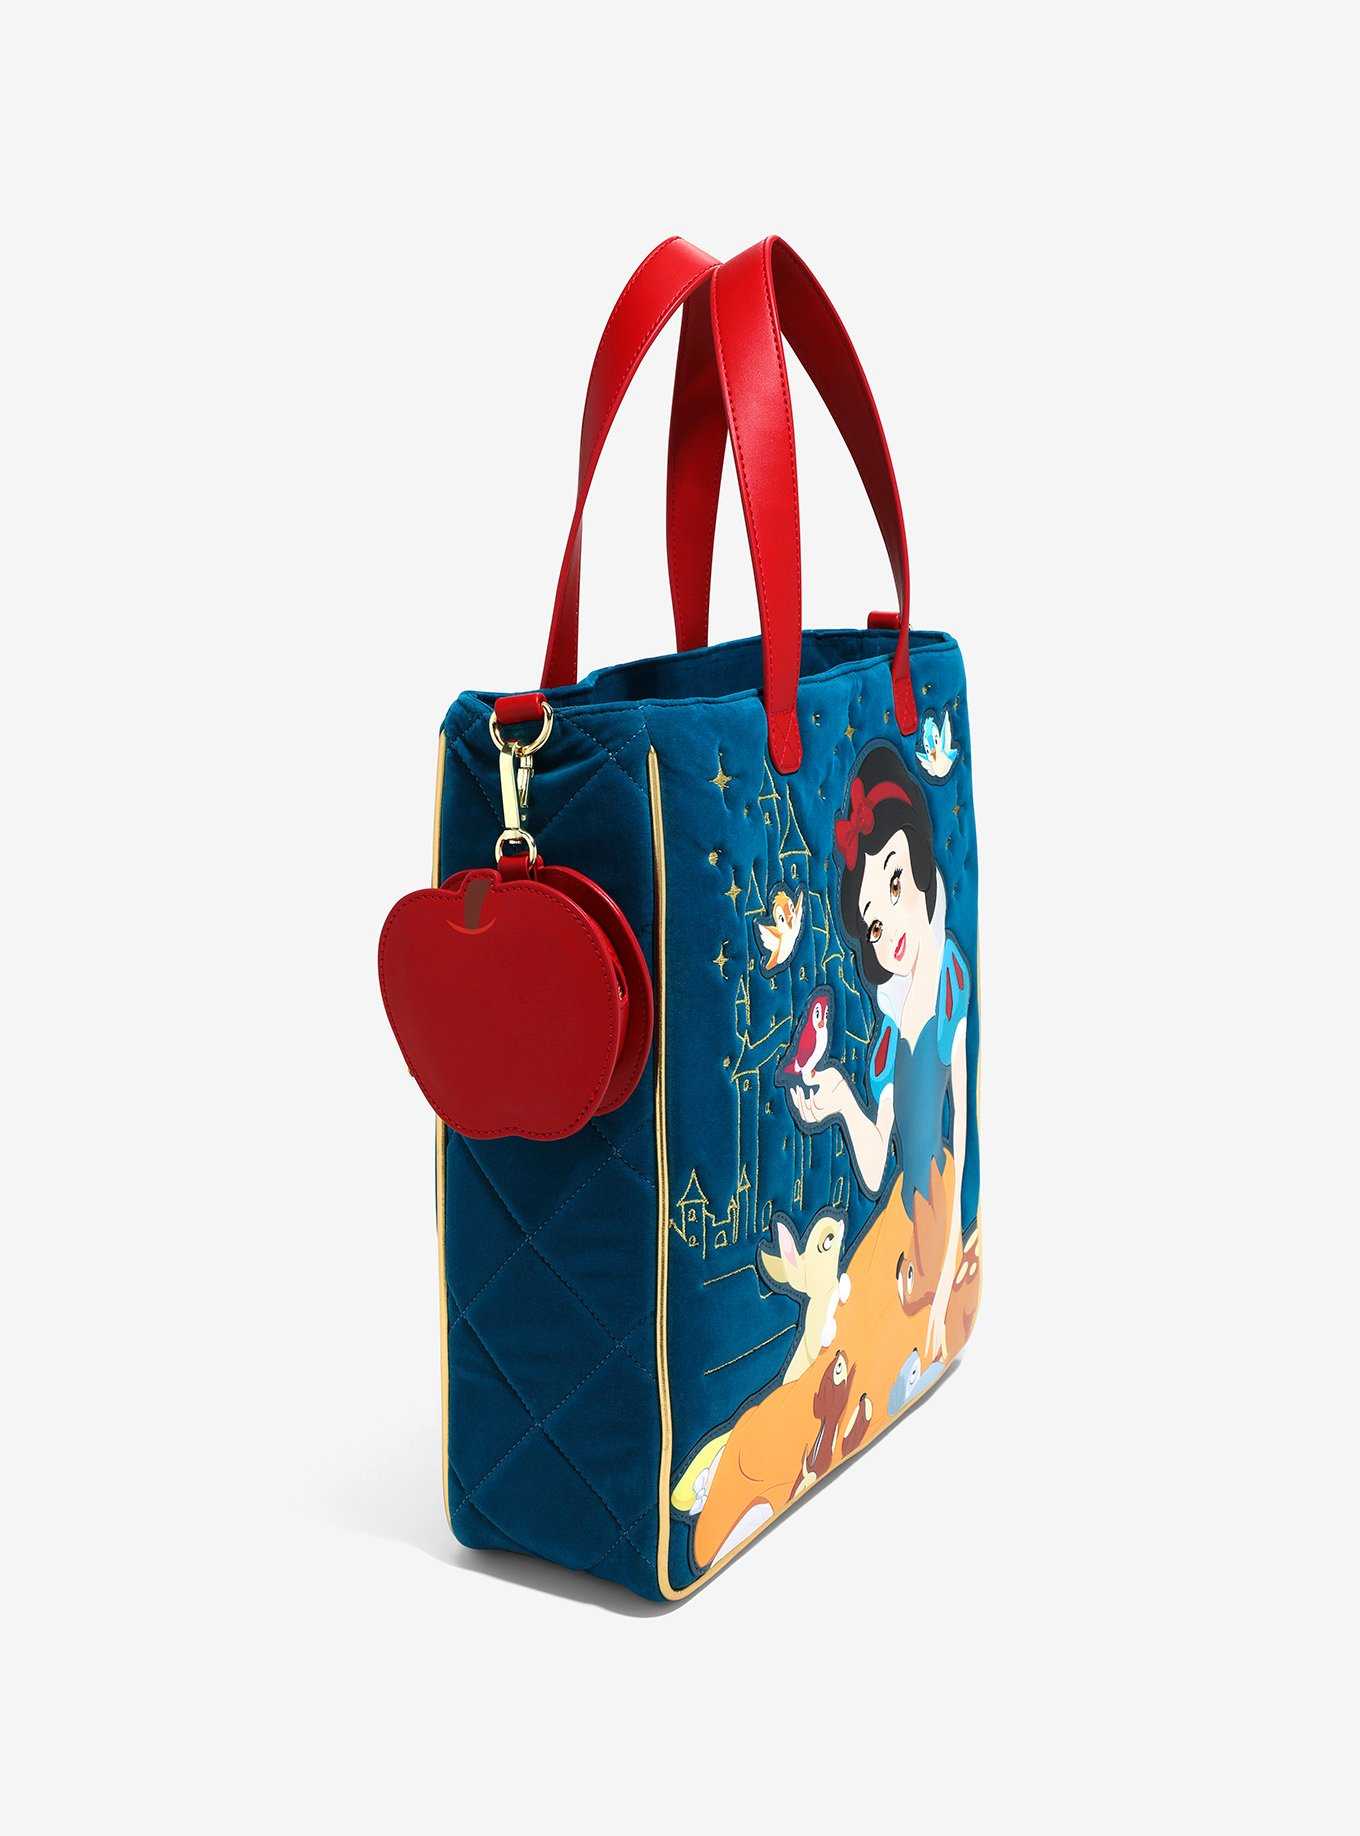 Loungefly Disney Snow White And The Seven Dwarfs Quilted Velvet Tote Bag, , hi-res